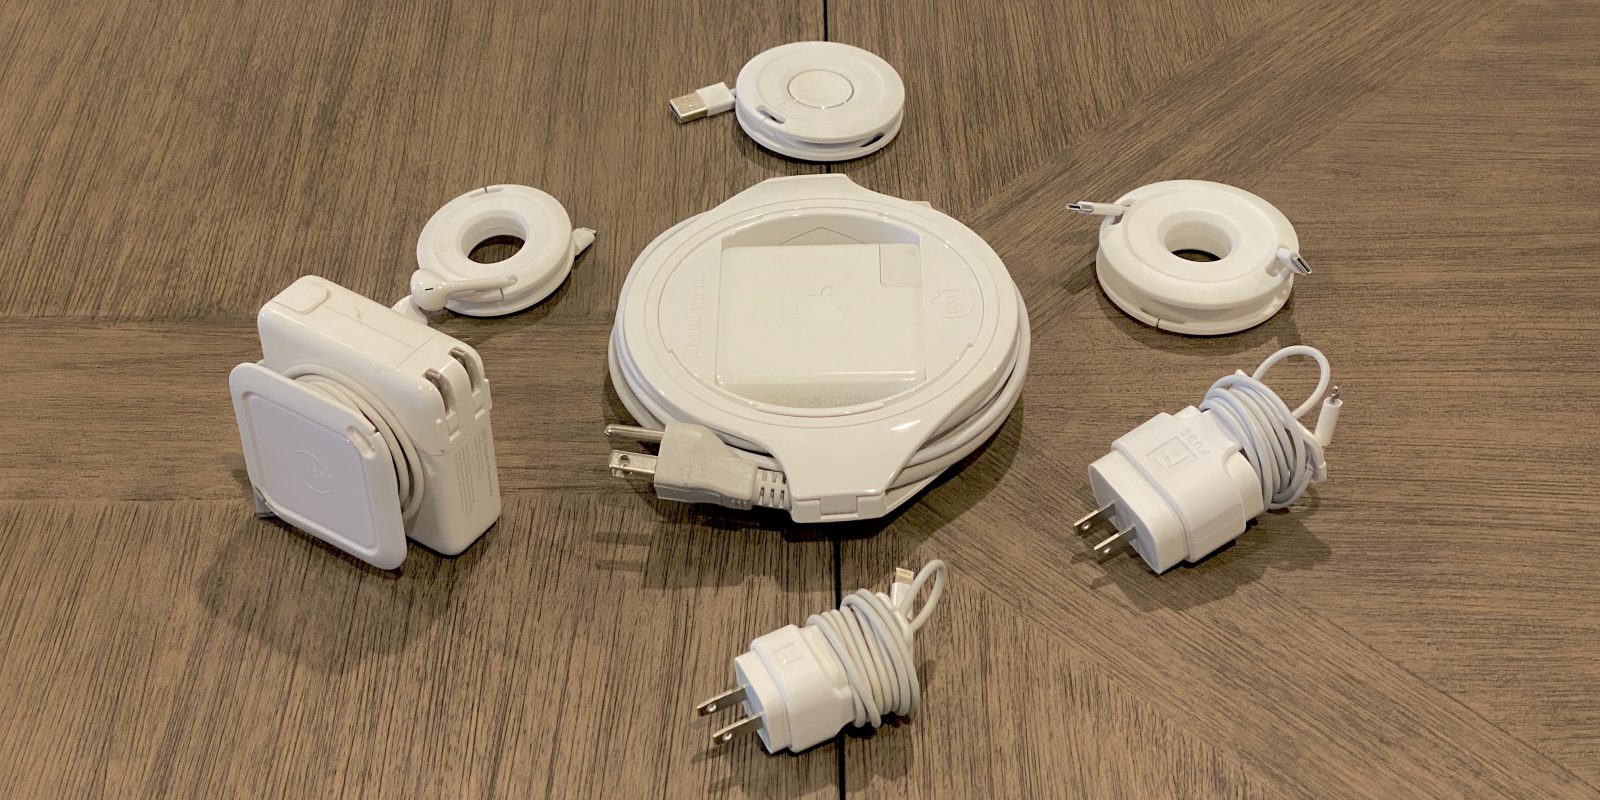 Hands-on: Fuse's new cable management lineup covers every Apple device